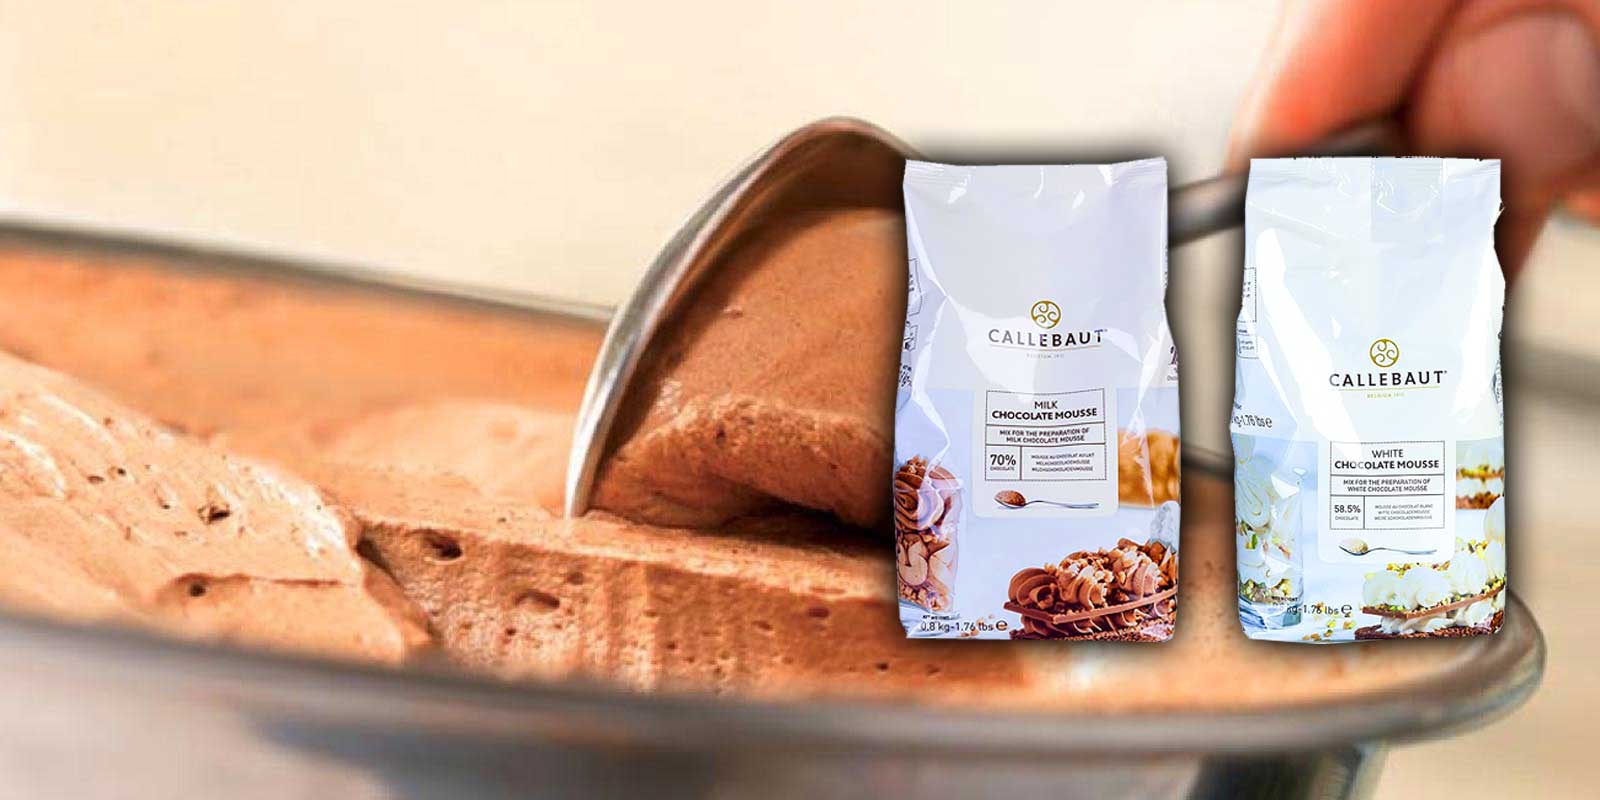 Mousse powder and brittle from Callebaut Callebaut wants to provide every confectioner with great chocolate and support you in what you love most - making wonderful chocolatey delights for your customers and friends, that is Callebaut`s goal. It all started in 1911 in a small Belgian town called Wieze.